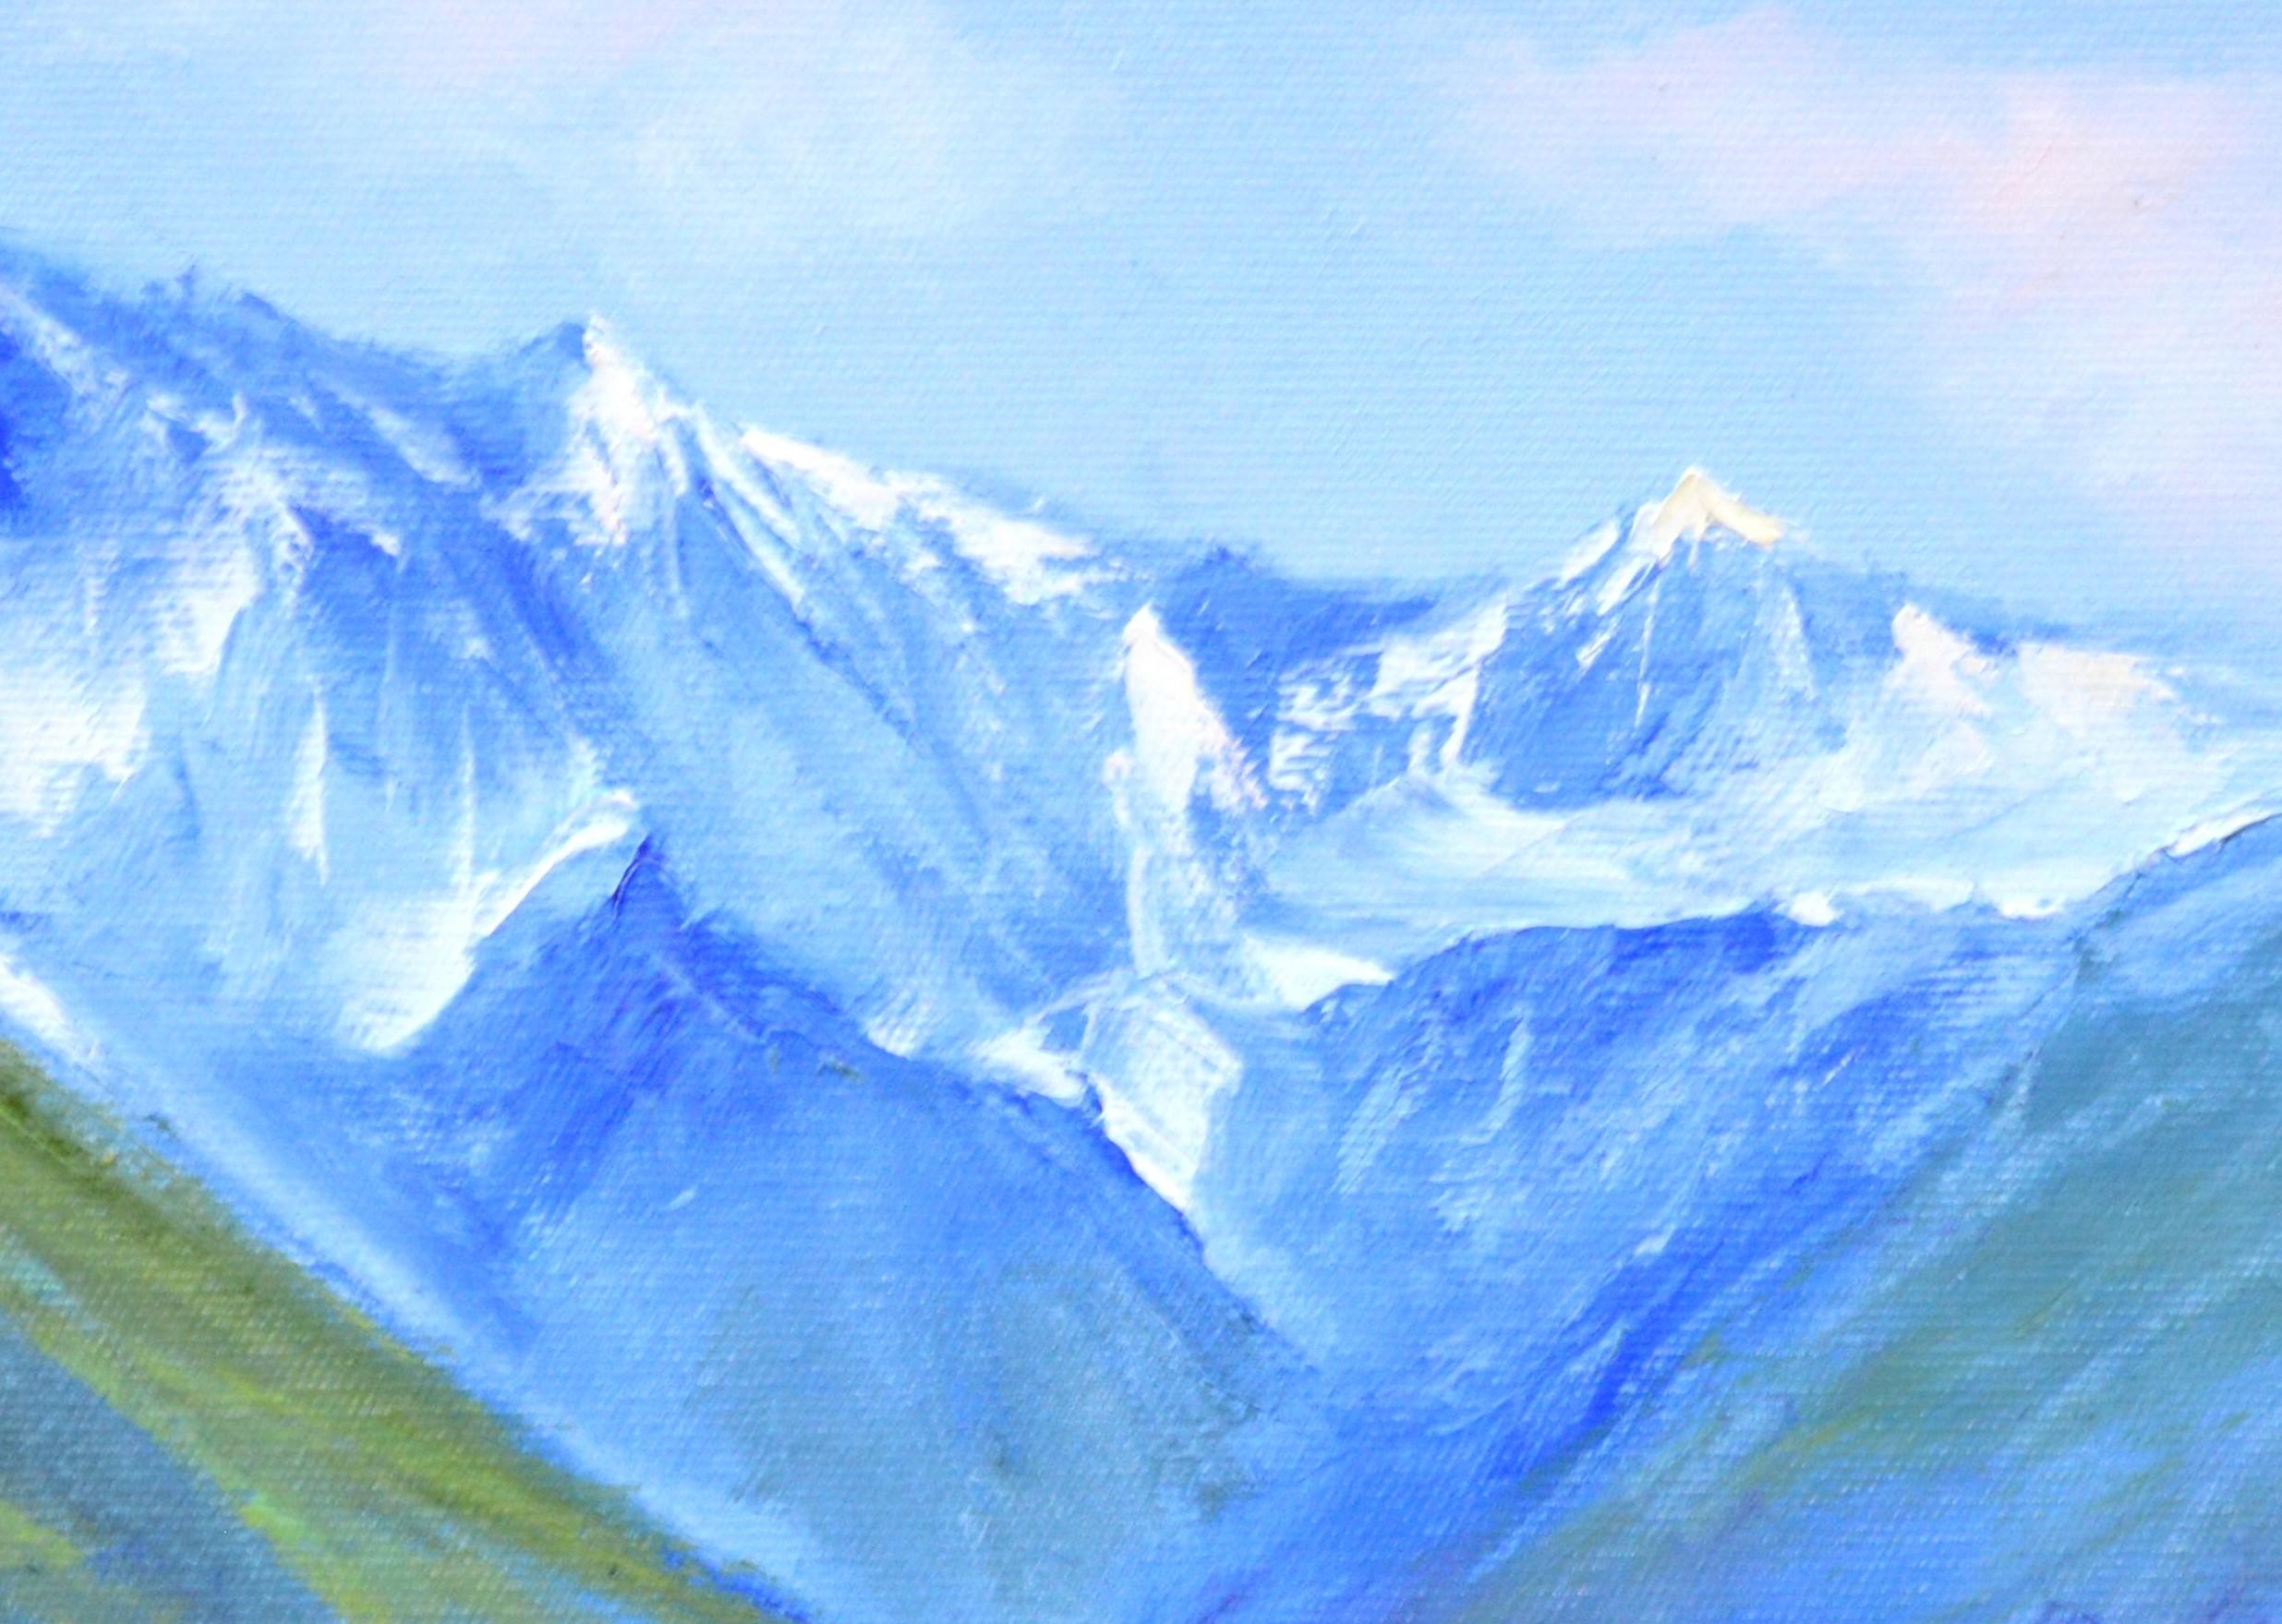 As the artist, I poured my soul into this creation, blending the vivid hues of nature with impassioned brushstrokes to encapsulate the serene yet wild spirit of the landscape. The mountains stand majestic, their peaks touched by the morning light,